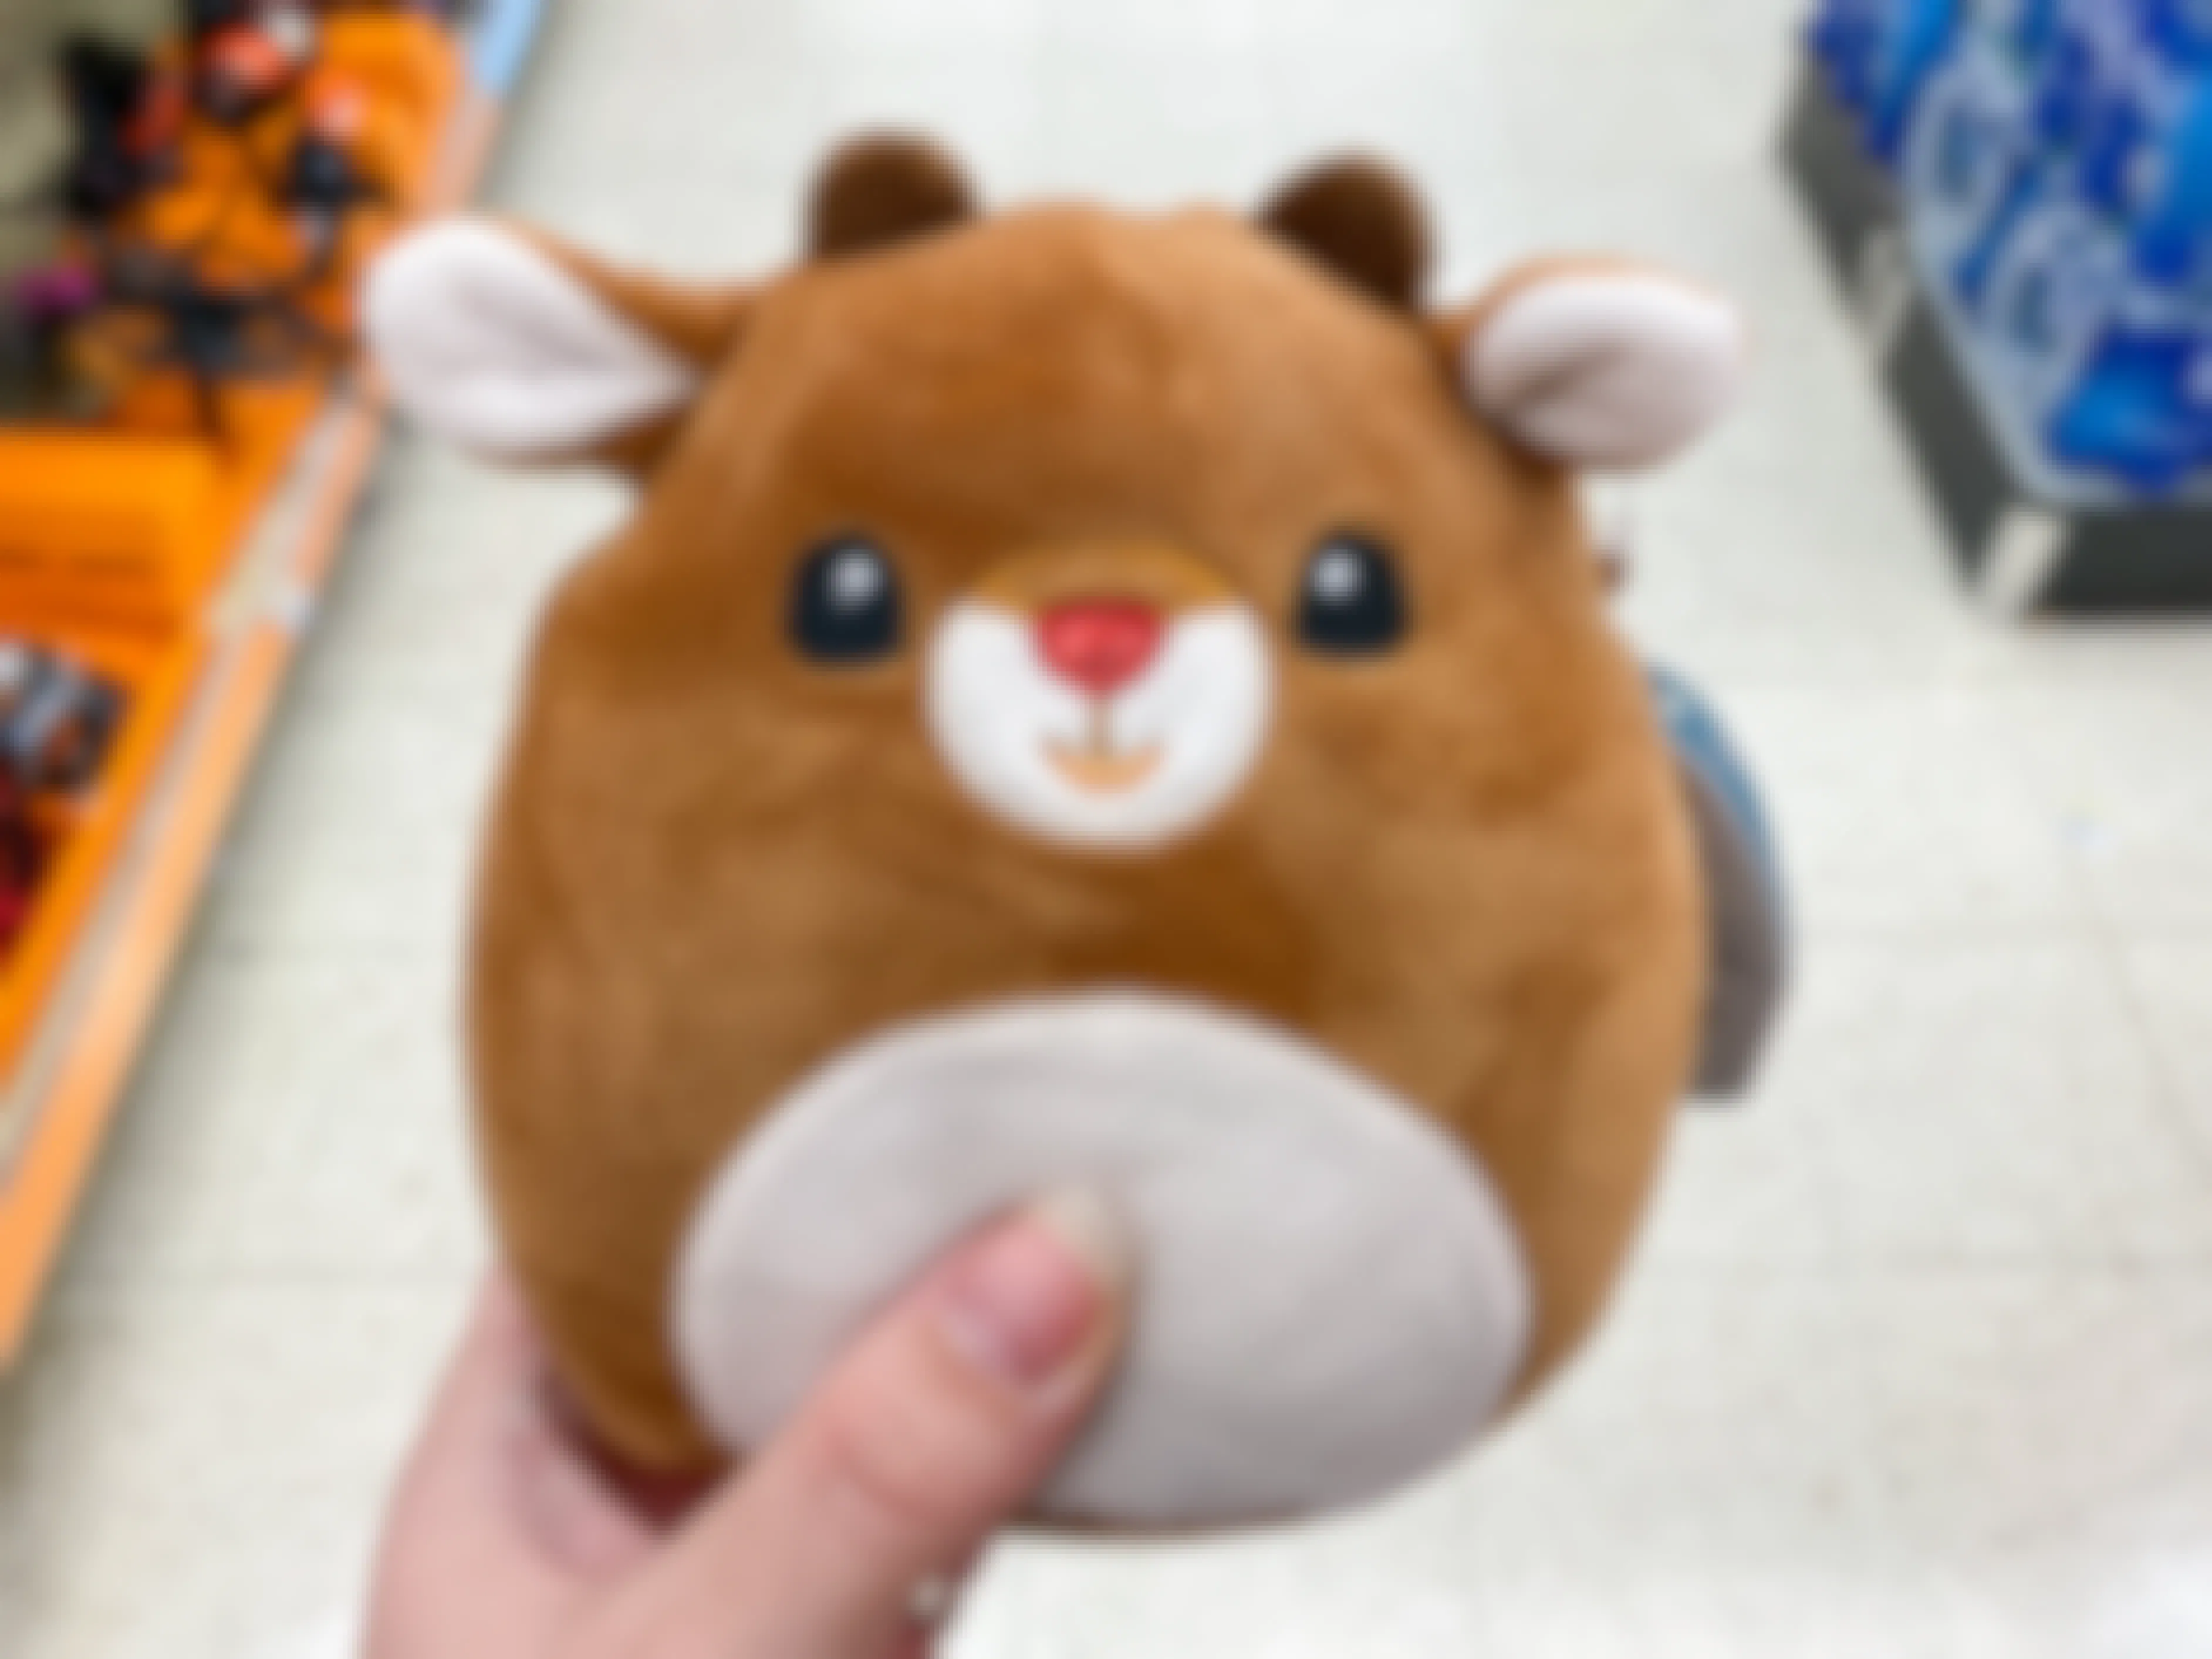 Someone holding a Rudolph holiday Squishmallow in an aisle at Walgreens.